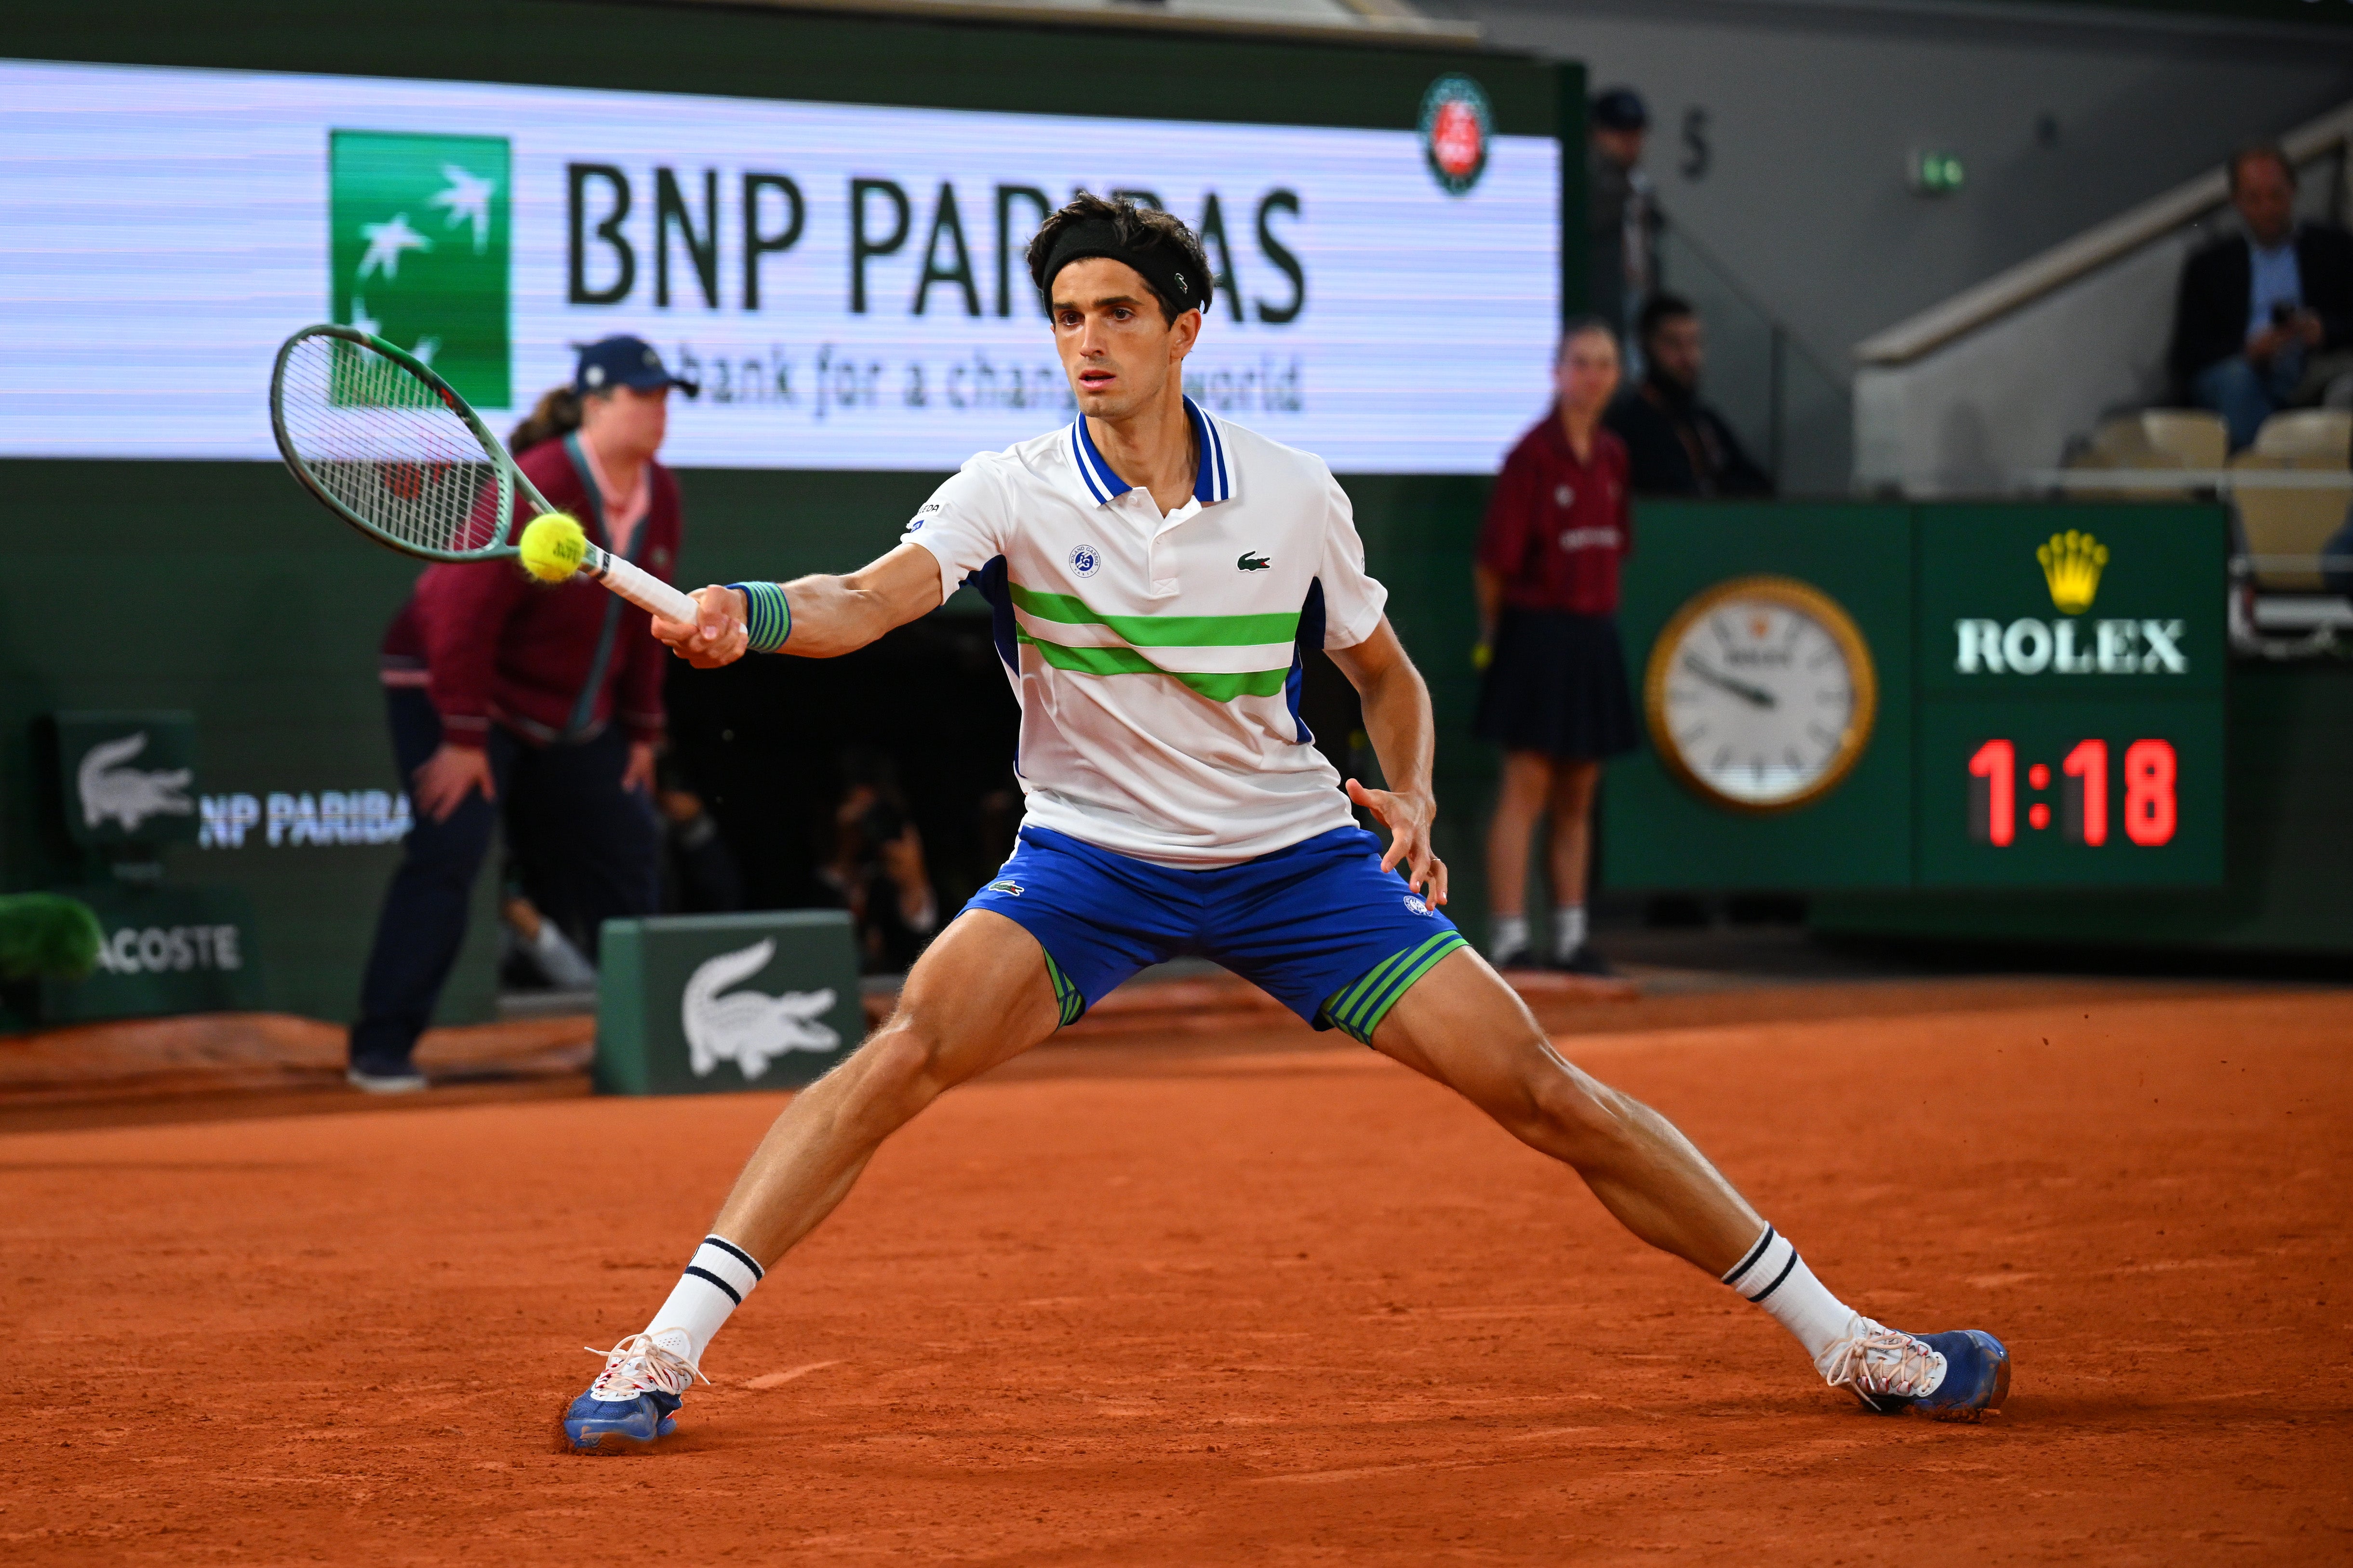 Pierre-Hugues Herbert fought valiantly at his home major